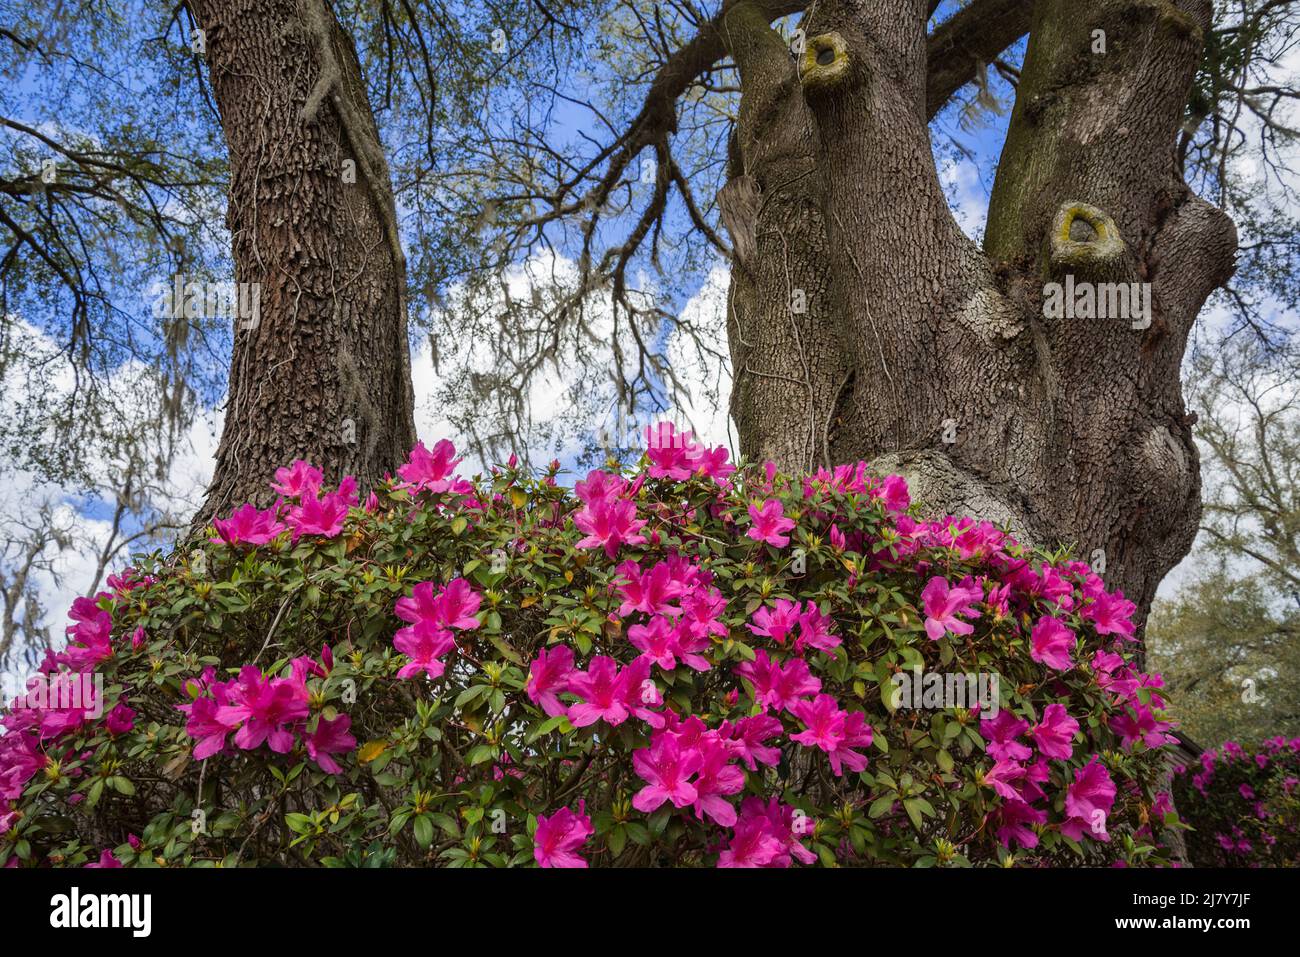 Huge Live Oak Trees with beautiful azaleas blooming at their base in North Central Florida, in early Springtime. Stock Photo